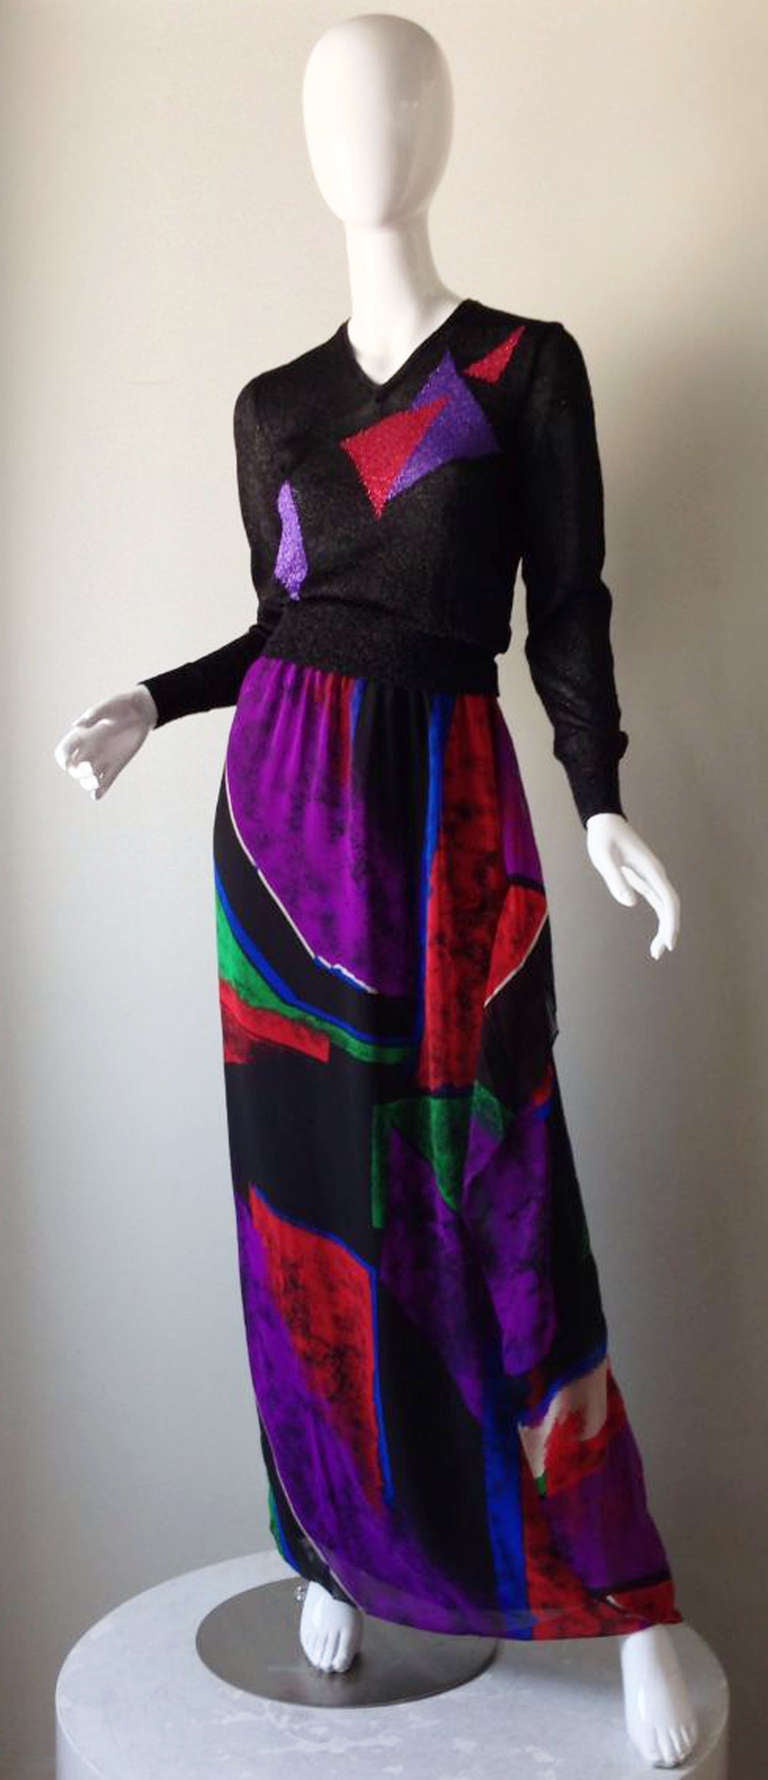 A fine vintage Hanae Mori 2pc. cocktail gown. Unworn item with original hang tag intact. Sparkly Lurex knit top with matching silk print floor length skirt. Faux wrap skirt fully lined and zips up side. Pristine, unworn.